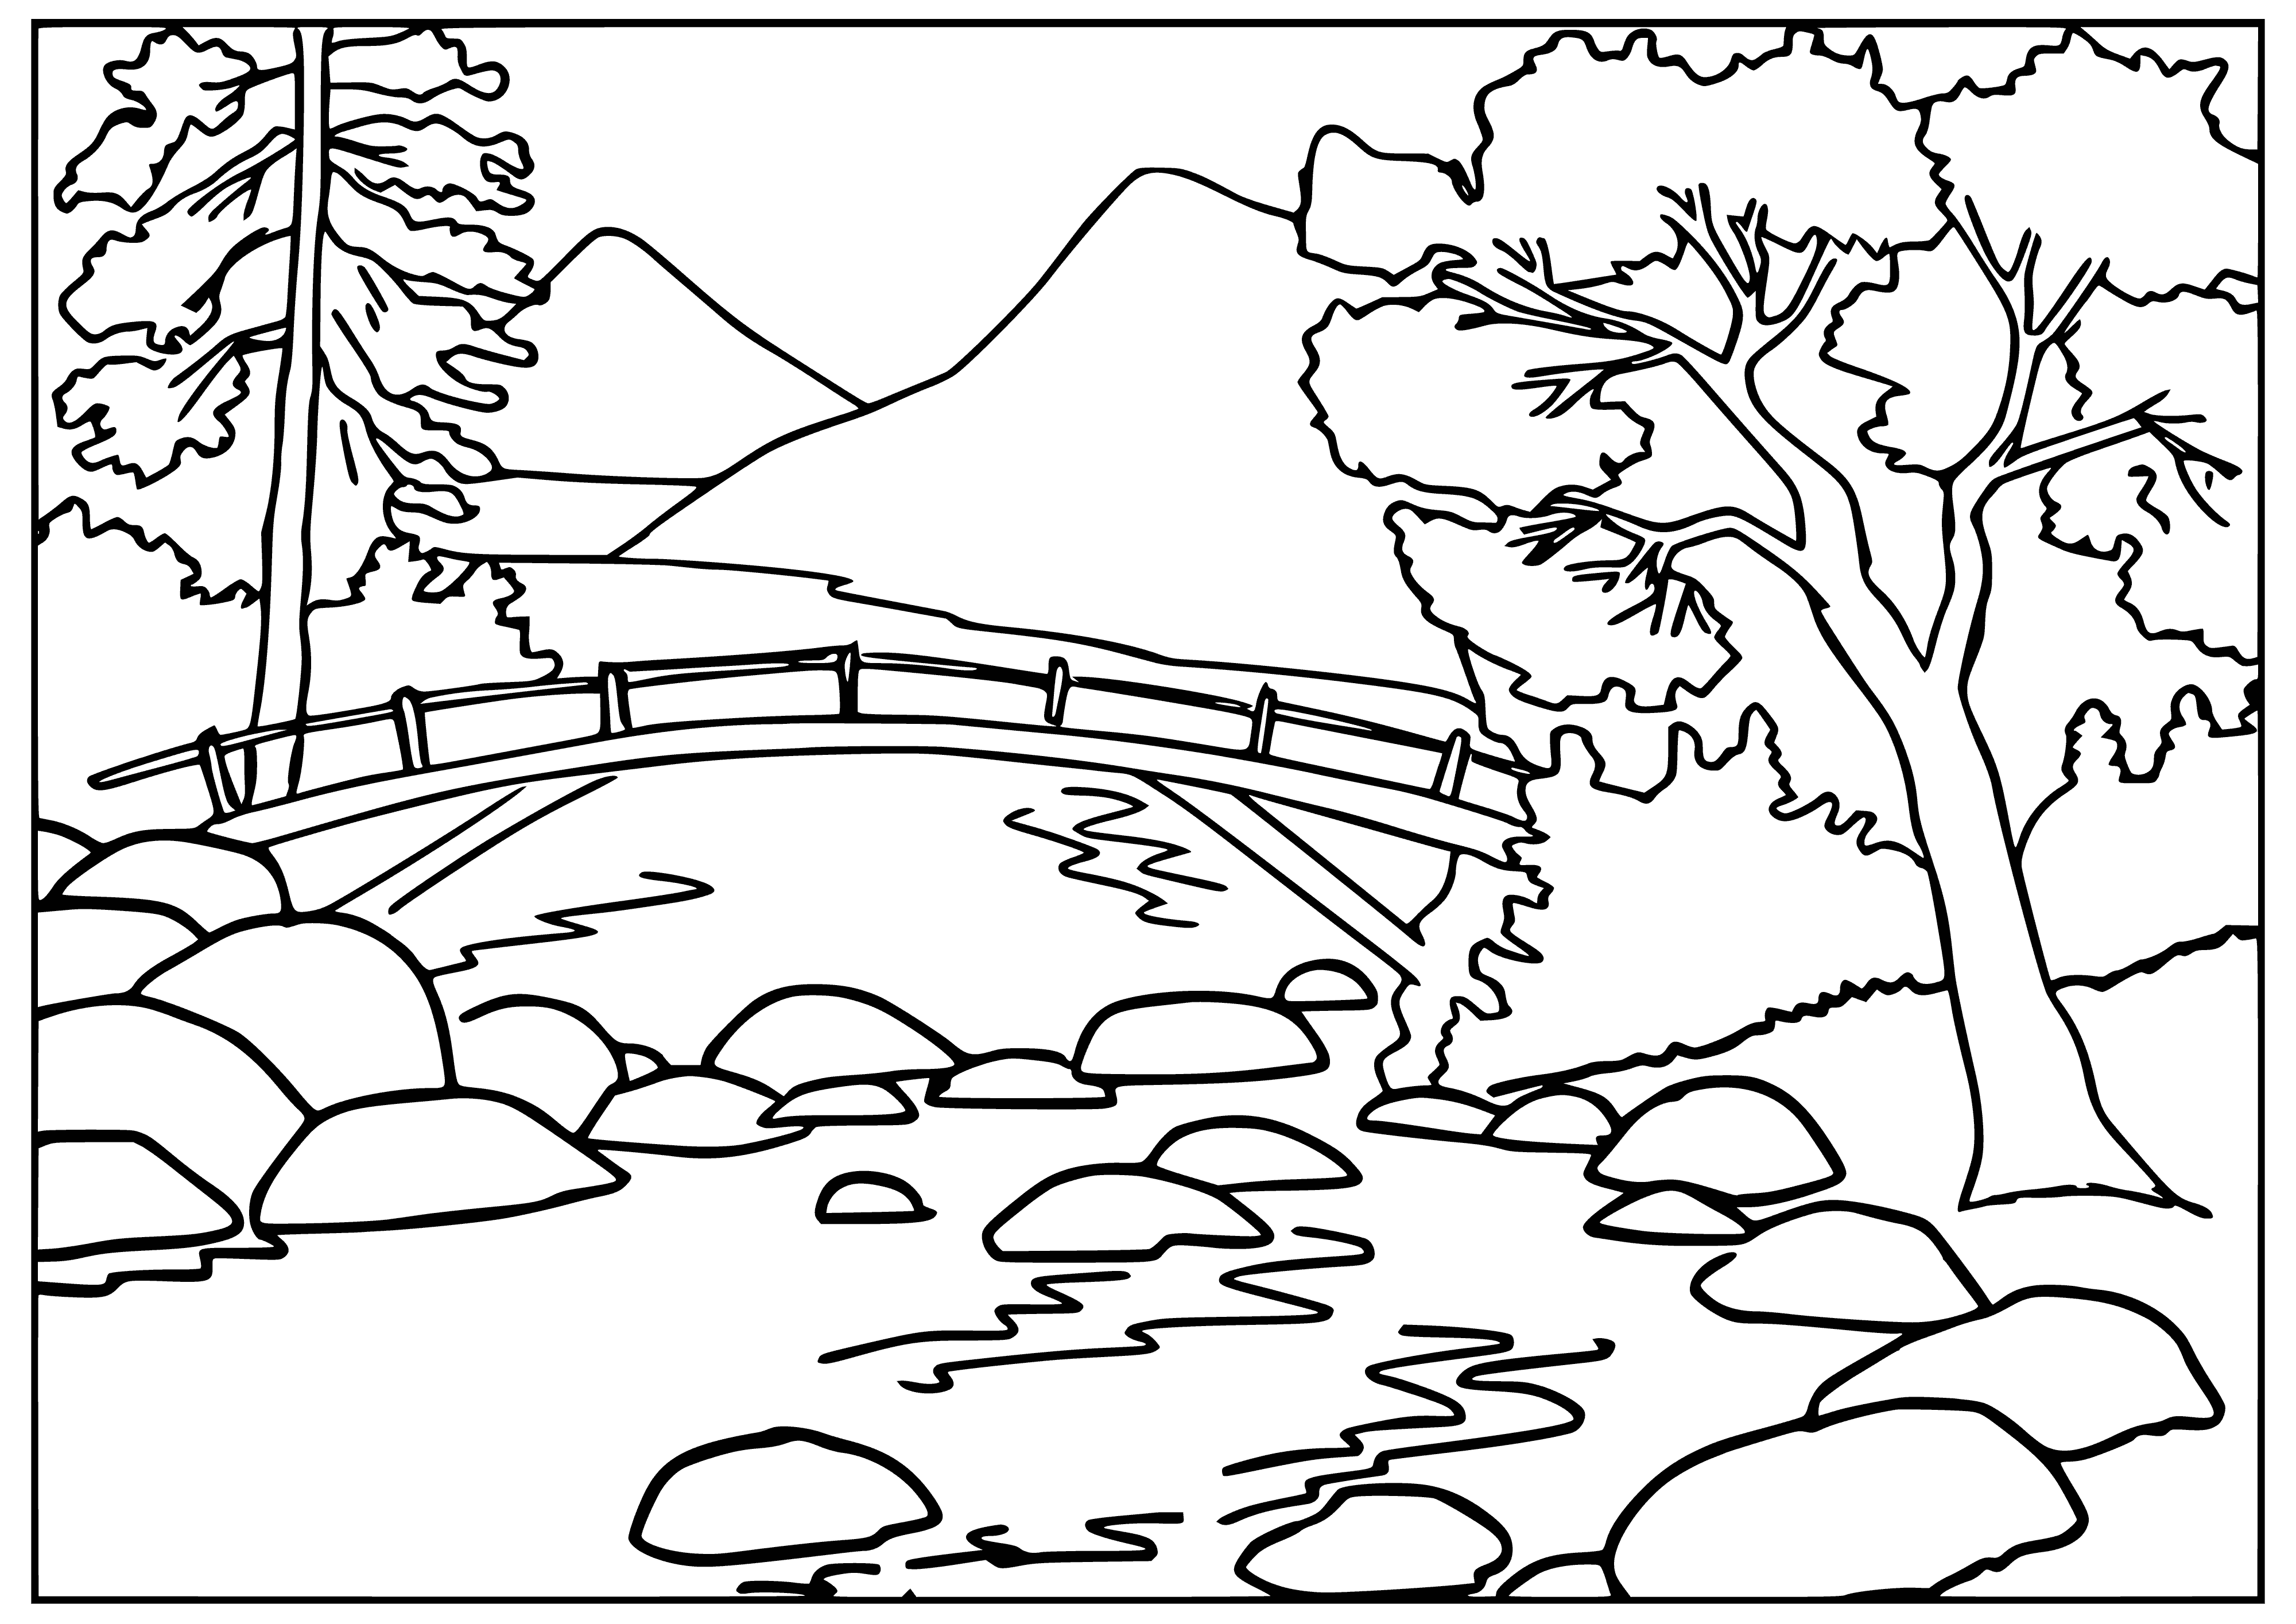 coloring page: A bridge of concrete and metal, with cars and pedestrians, standing over a river. #coloringpage